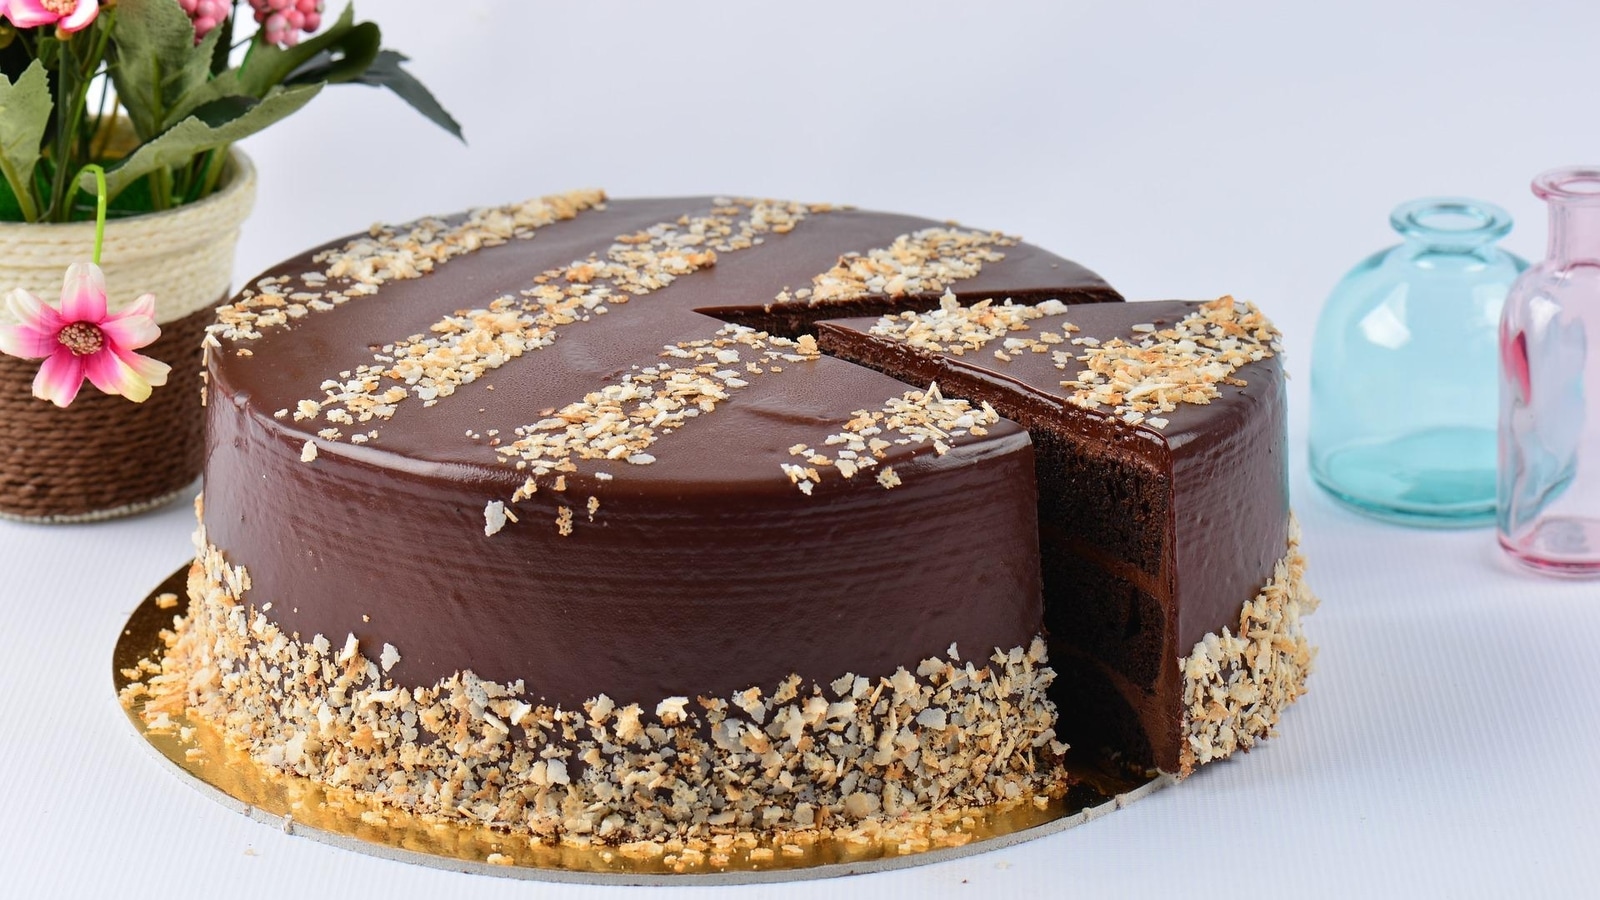 Best Baking Products in Kolkata  Cake Ingredients Online - All About Baking